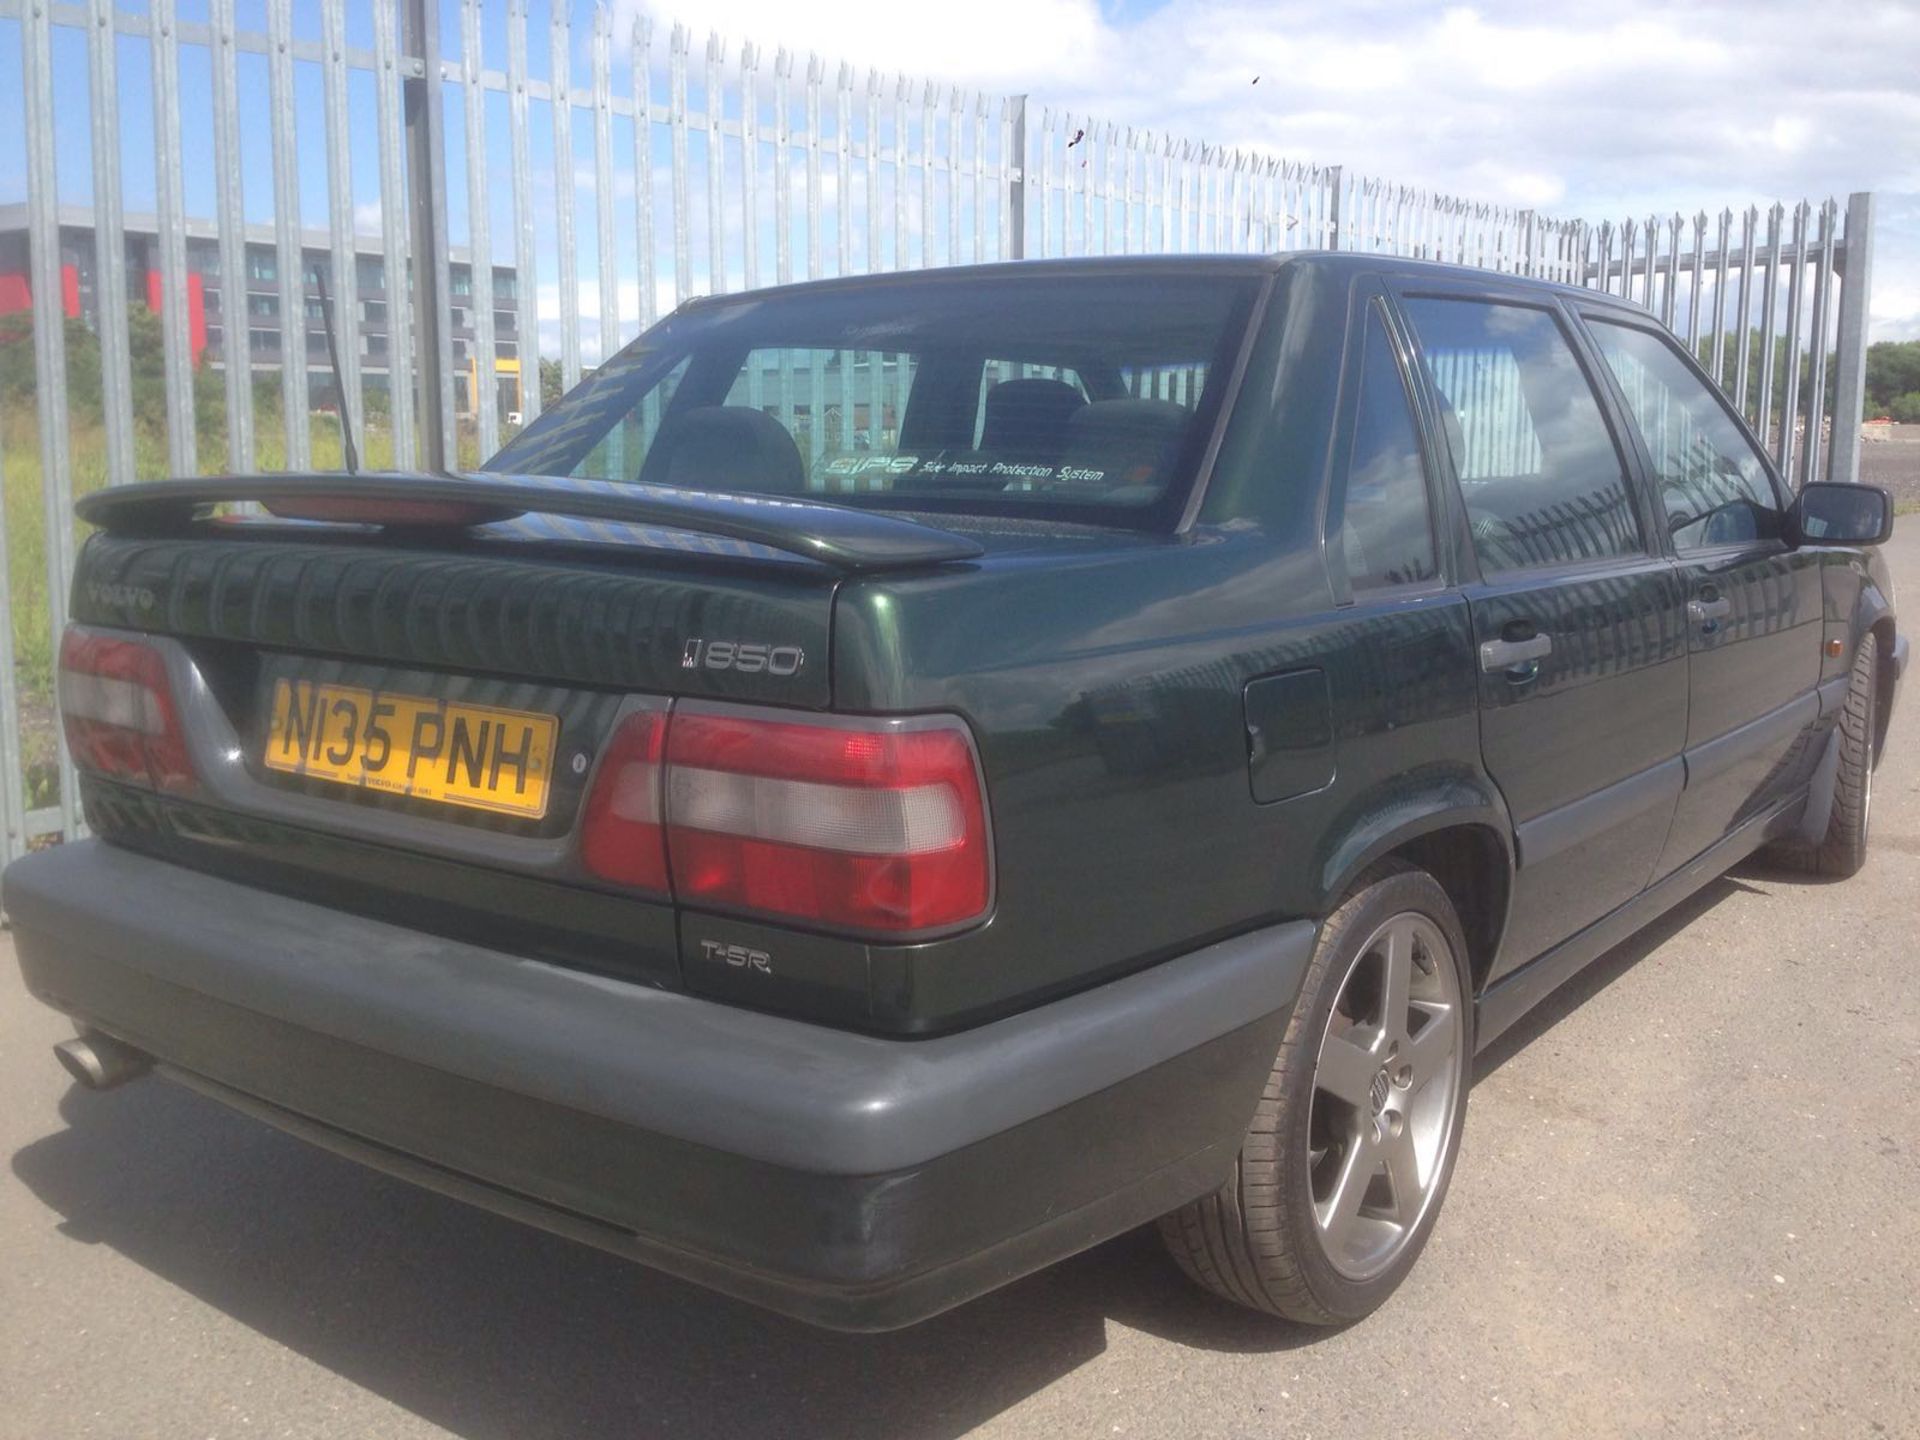 VOLVO T5-R saloon auto, 1995/N. olive green, - Image 7 of 18